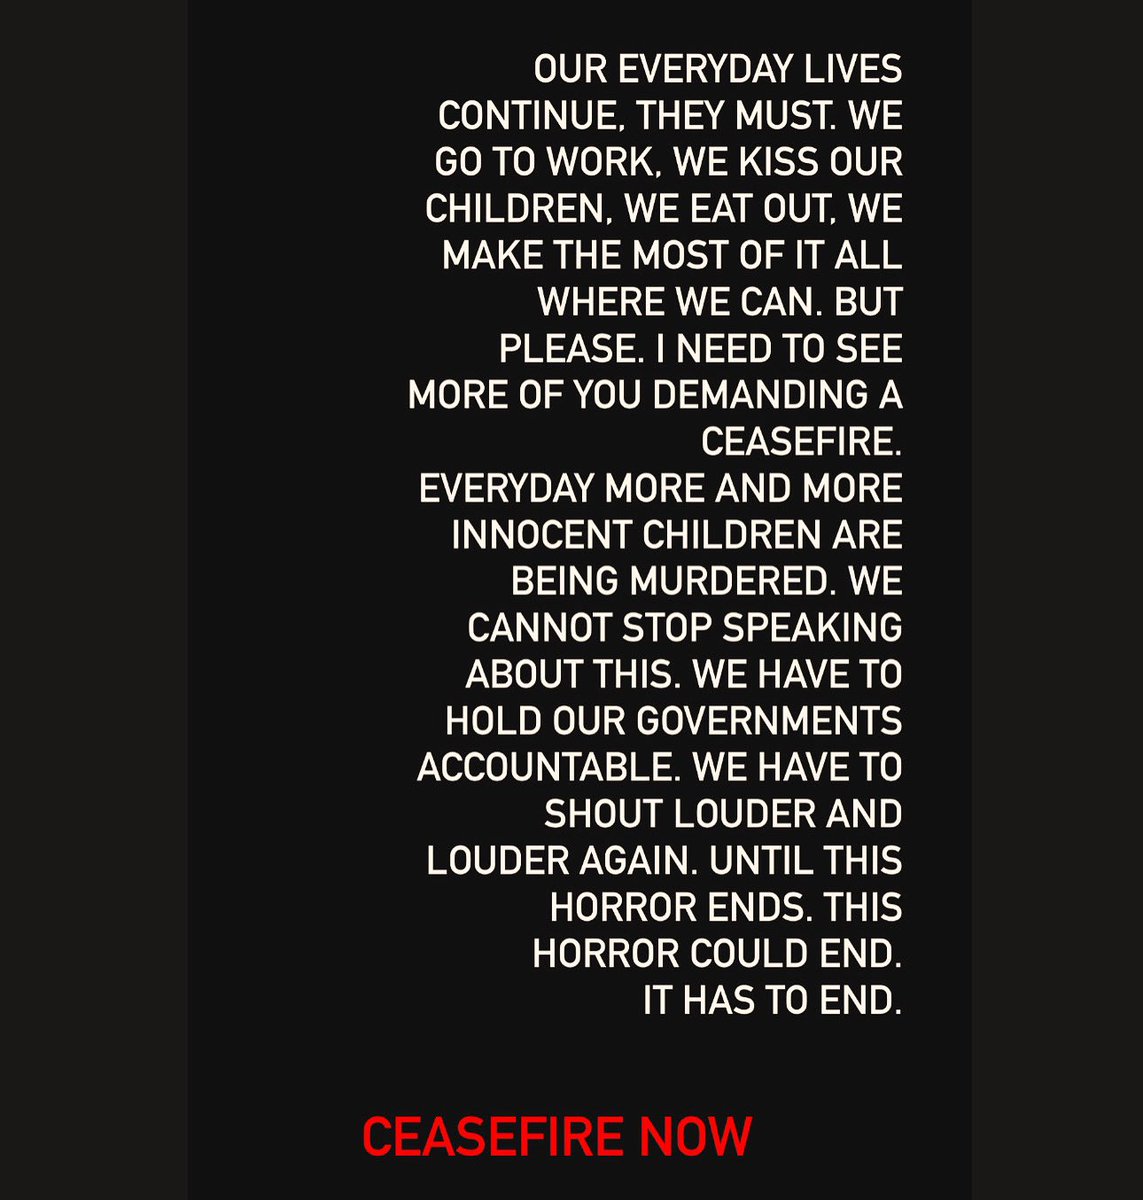 We can do more. We are watching the brutal senseless murders of innocent lives, of children and of babies, it’s being live streamed to us in real time. Now we are watching them being starved. There has to be an end to this inhumanity. #ceasefirenow